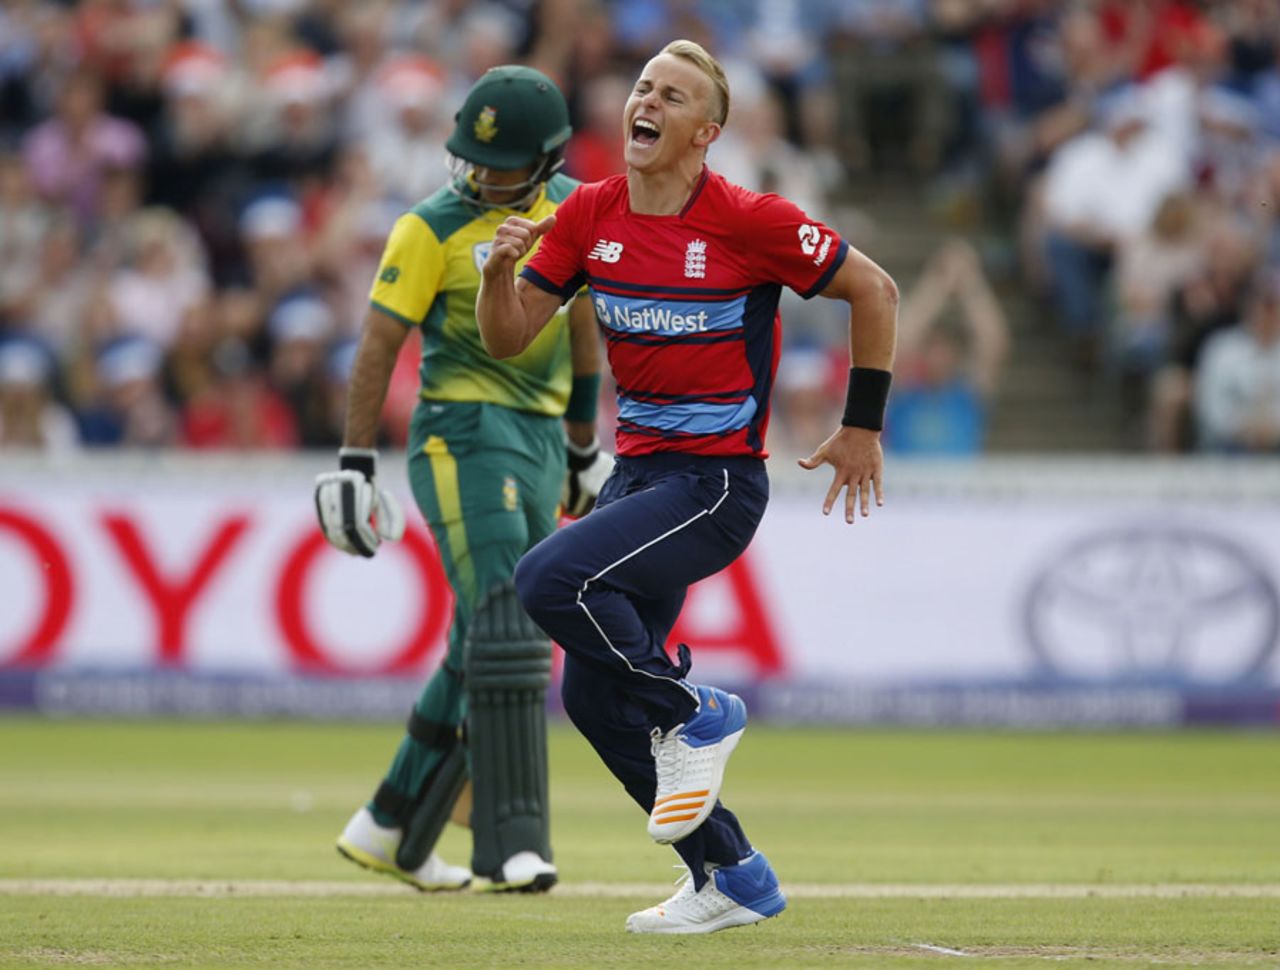 Tom Curran claimed a wicket with his second ball, England v South Africa, 2nd T20I, Taunton, June 23, 2017